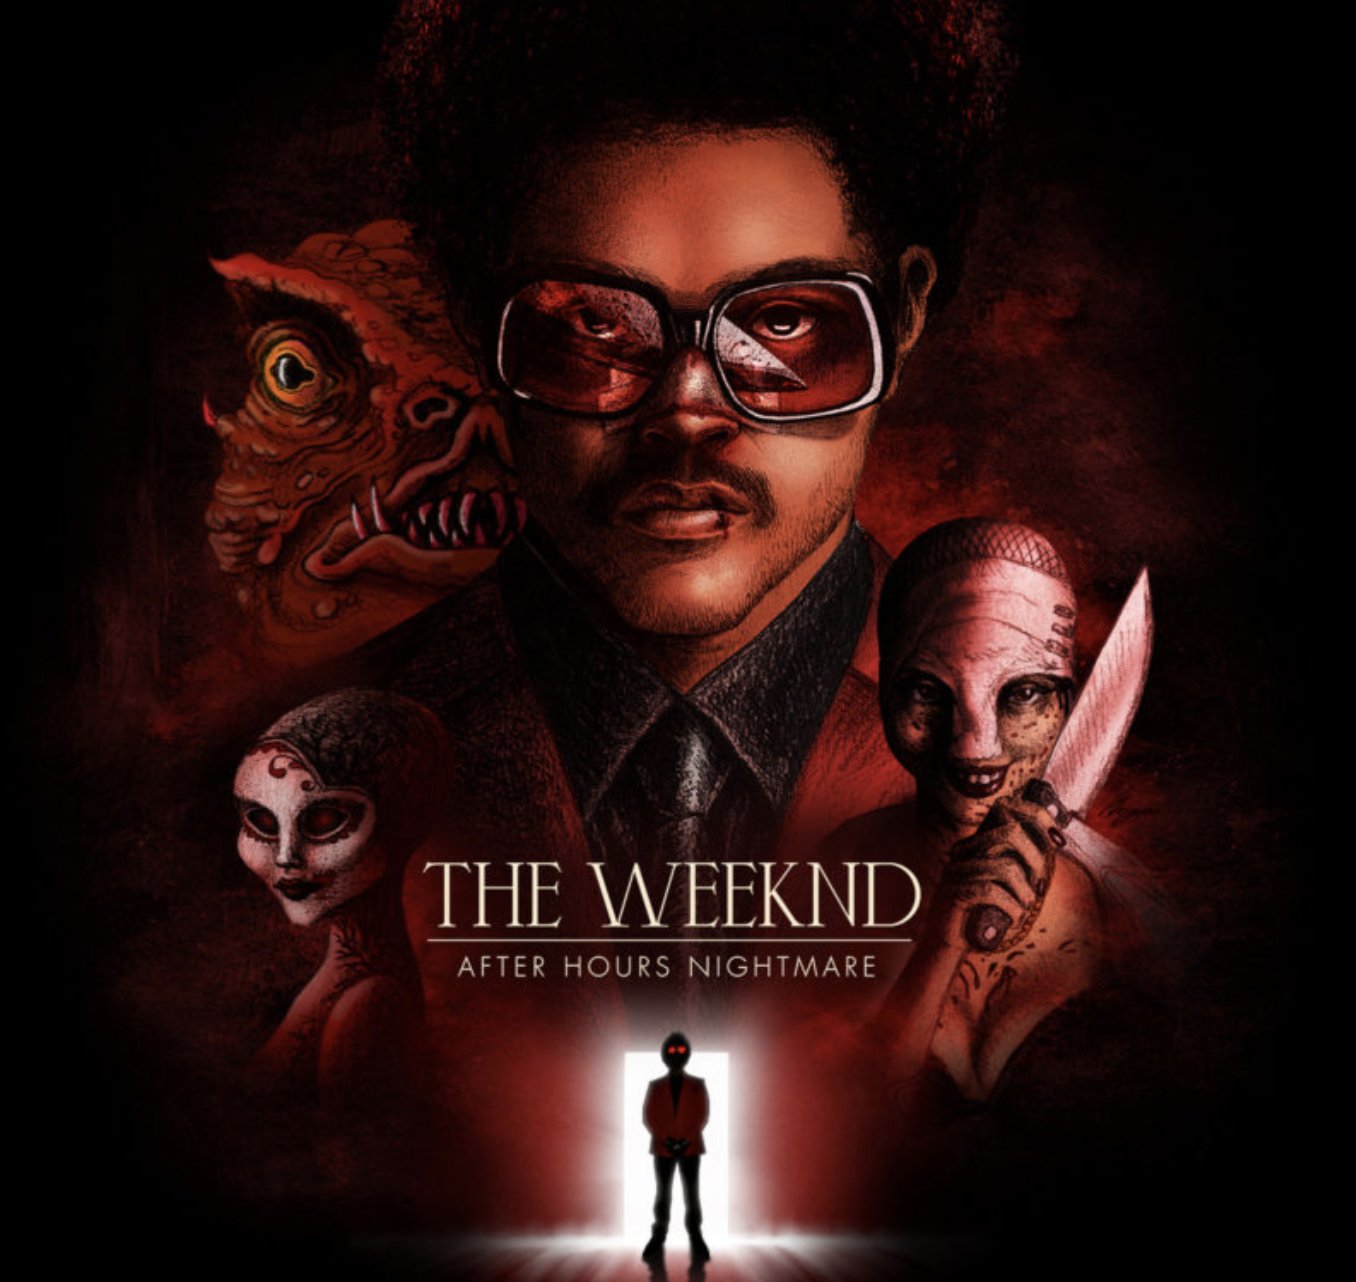 The Weeknd Comes To Universal's Halloween Horror Nights 2022